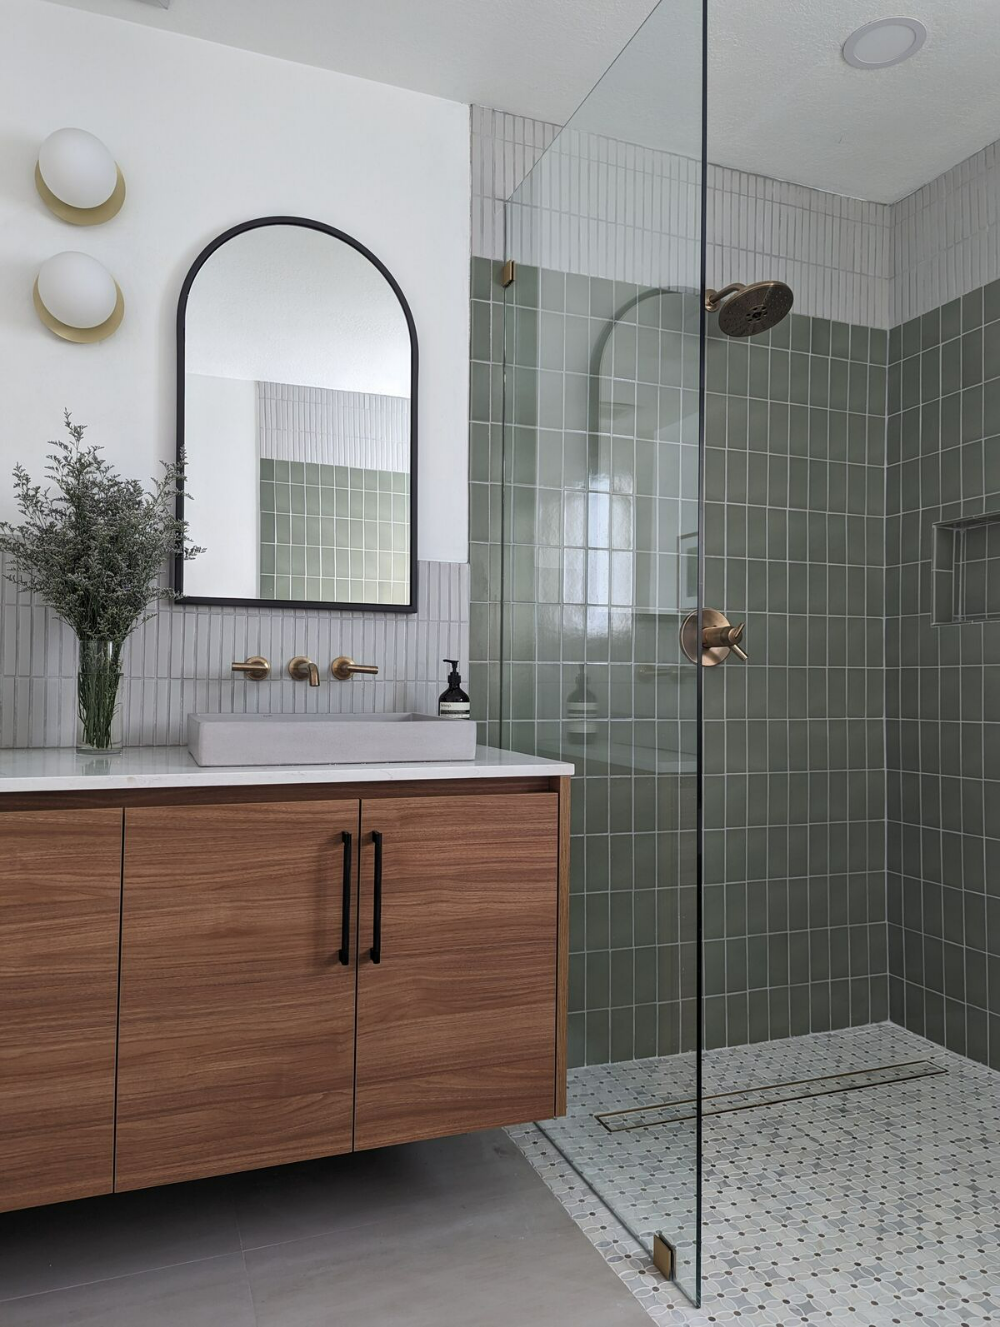 Bathroom Floor Tiles: Functional and Aesthetic Choices for Your Sanctuary